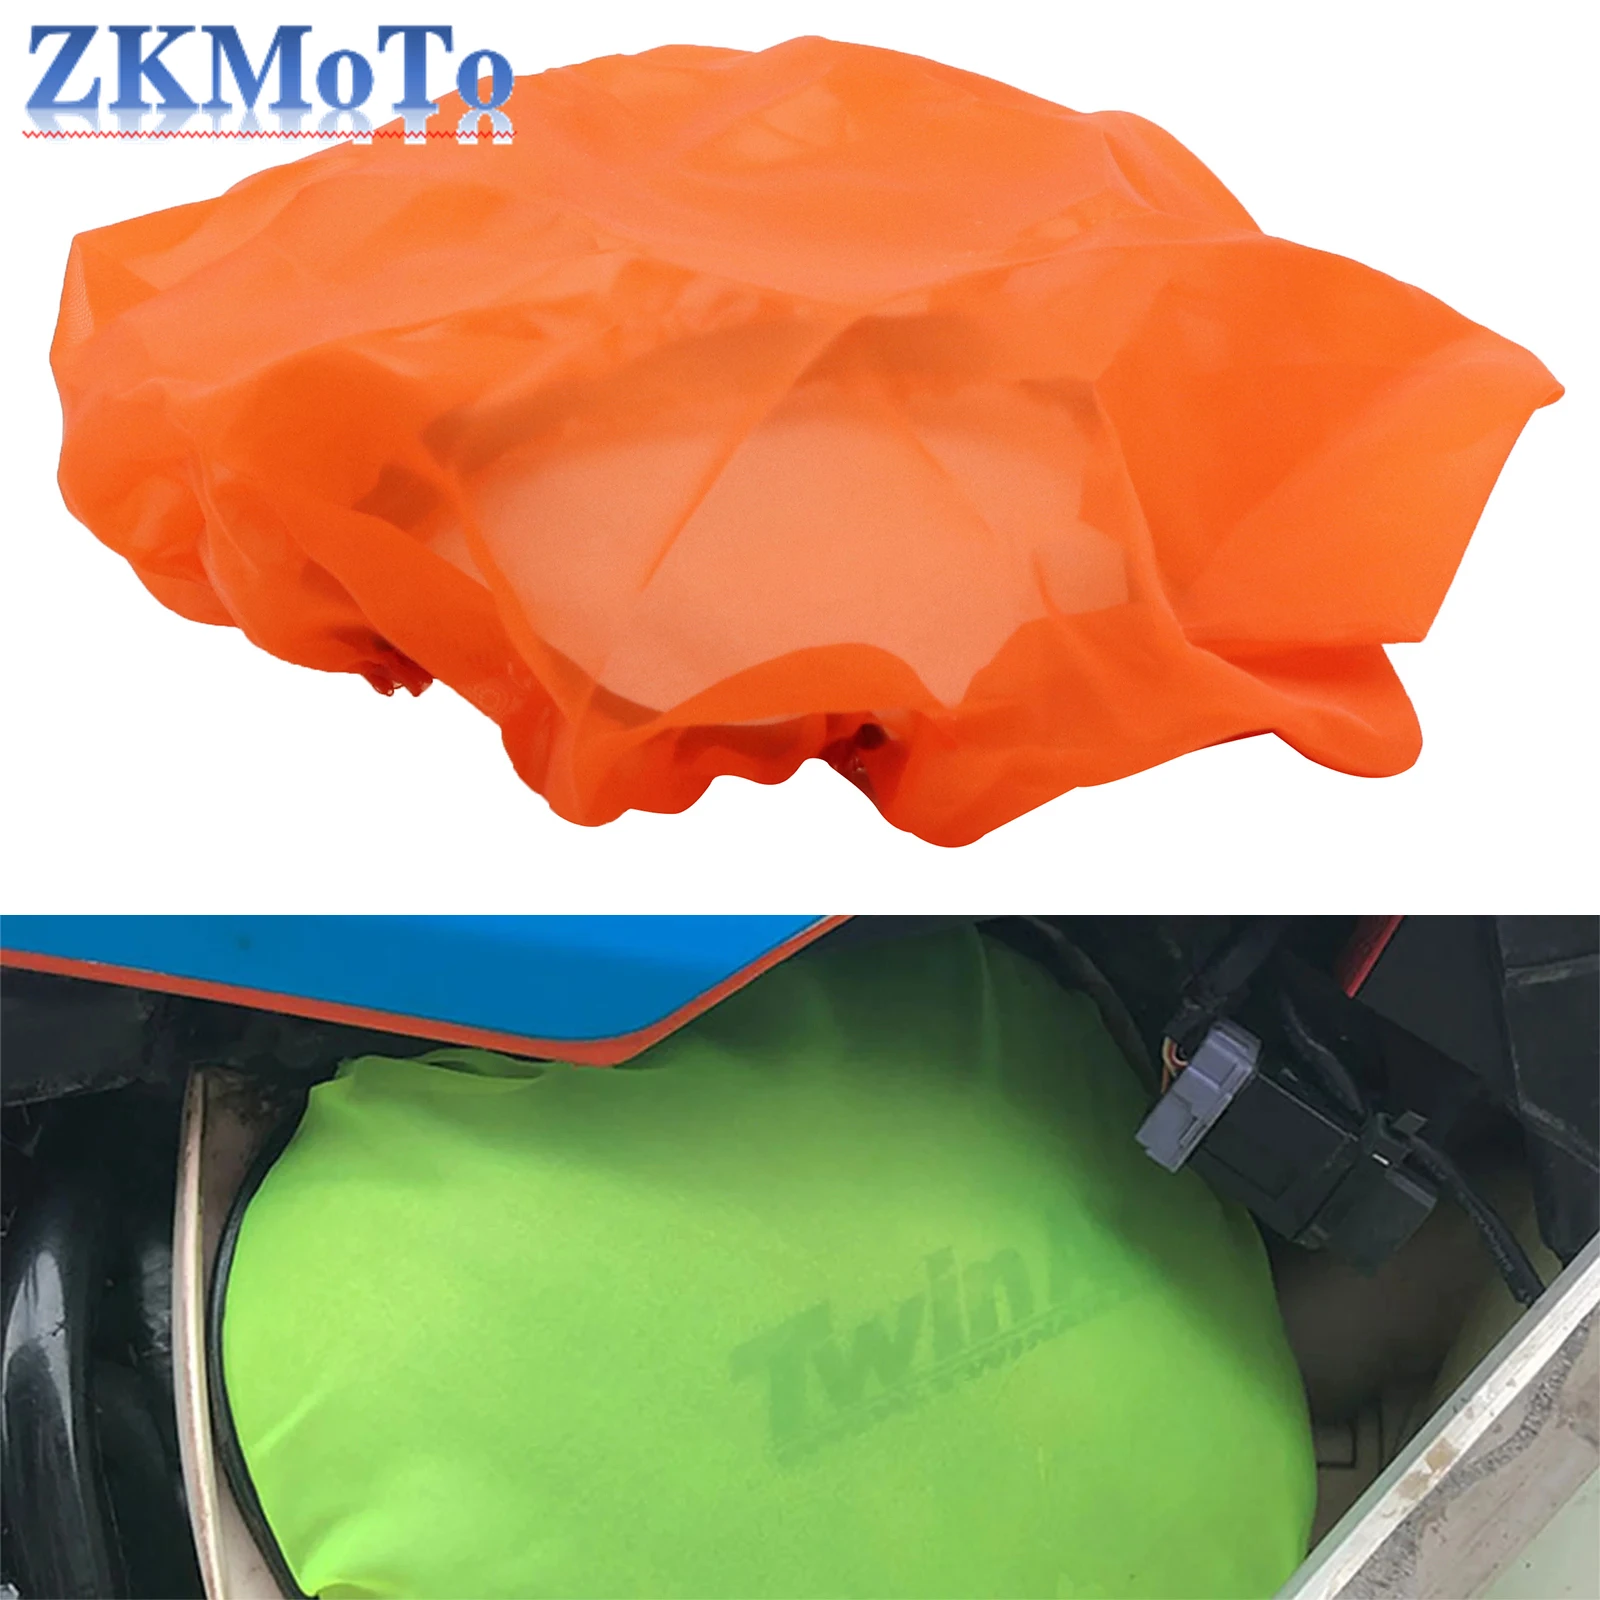 CAKEN Motorcycle Air Filter Dustproof Sand Cover Engine Cleaning Protection For - £10.59 GBP